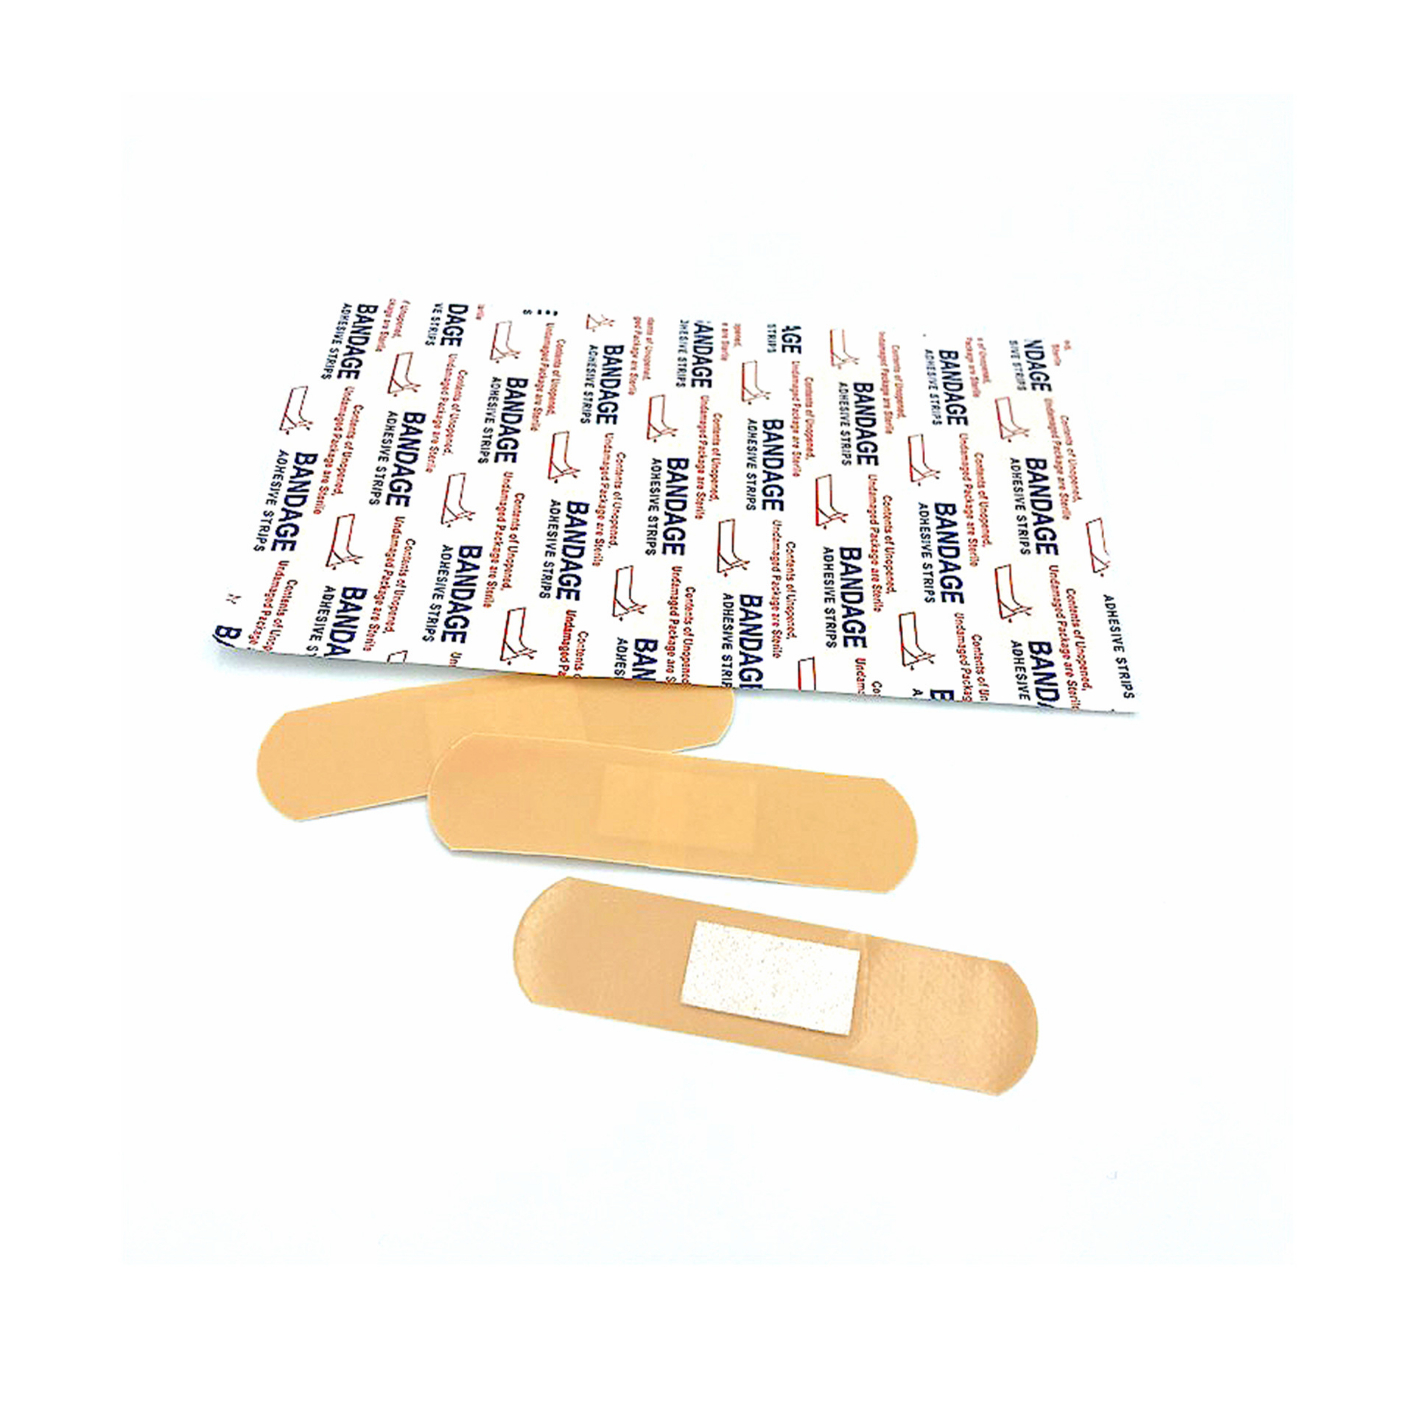 UJ114026 100 Pcs First Aid Medical Bandages Band-Aids Waterproof Breathable Cushion Adhesive Plaster Wound Hemostasis Sticker Band